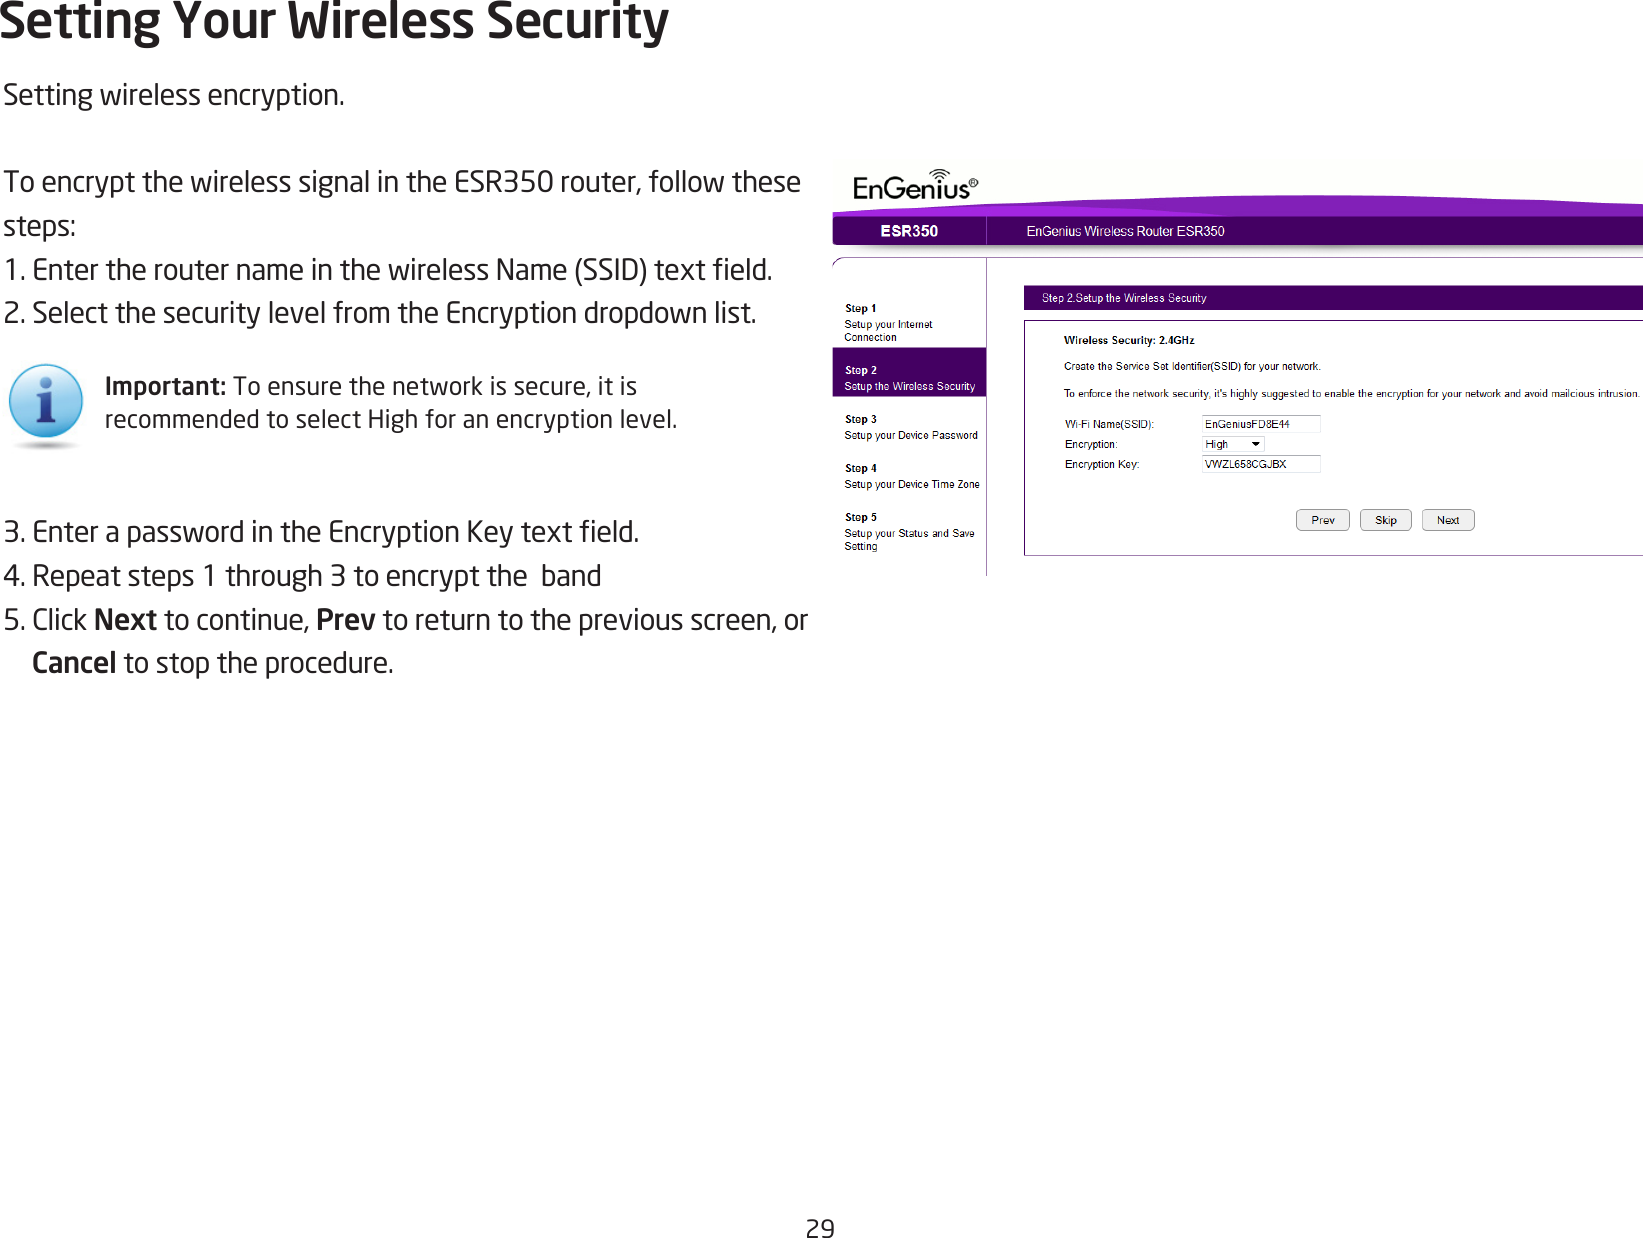 29Settingwirelessencryption.ToencryptthewirelesssignalintheESR350router,followthesesteps:1.EntertherouternameinthewirelessName(SSID)texteld.2.SelectthesecuritylevelfromtheEncryptiondropdownlist.3.EnterapasswordintheEncryptionKeytexteld.4.Repeatsteps1through3toencrypttheband5.ClickNext to continue, Prev to return to the previous screen, or Cancel to stop the procedure.Setting Your Wireless SecurityImportant:Toensurethenetworkissecure,itisrecommended to select High for an encryption level.